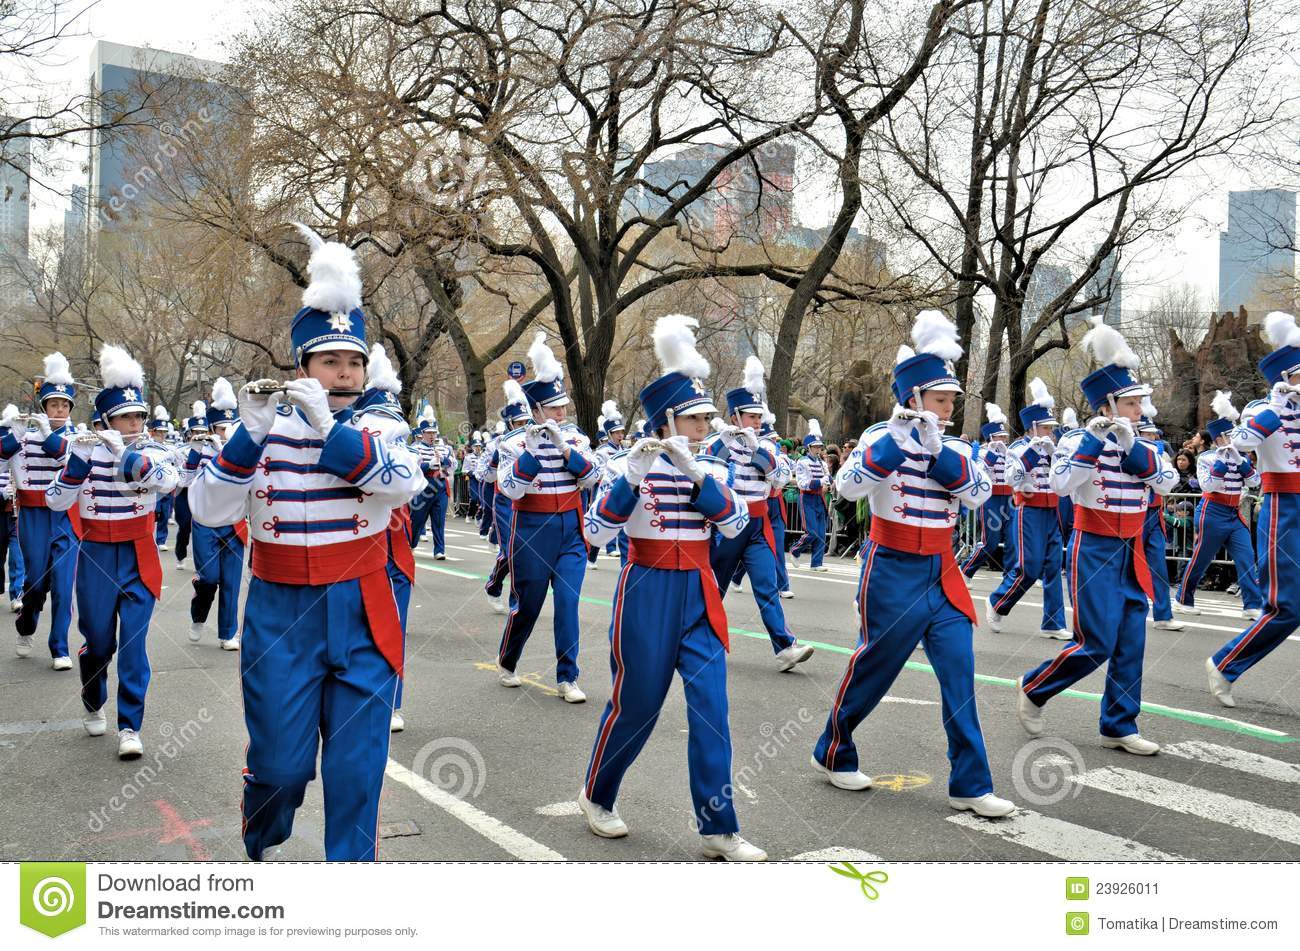 High School Lancers Marching Band From New Hampshire Marching